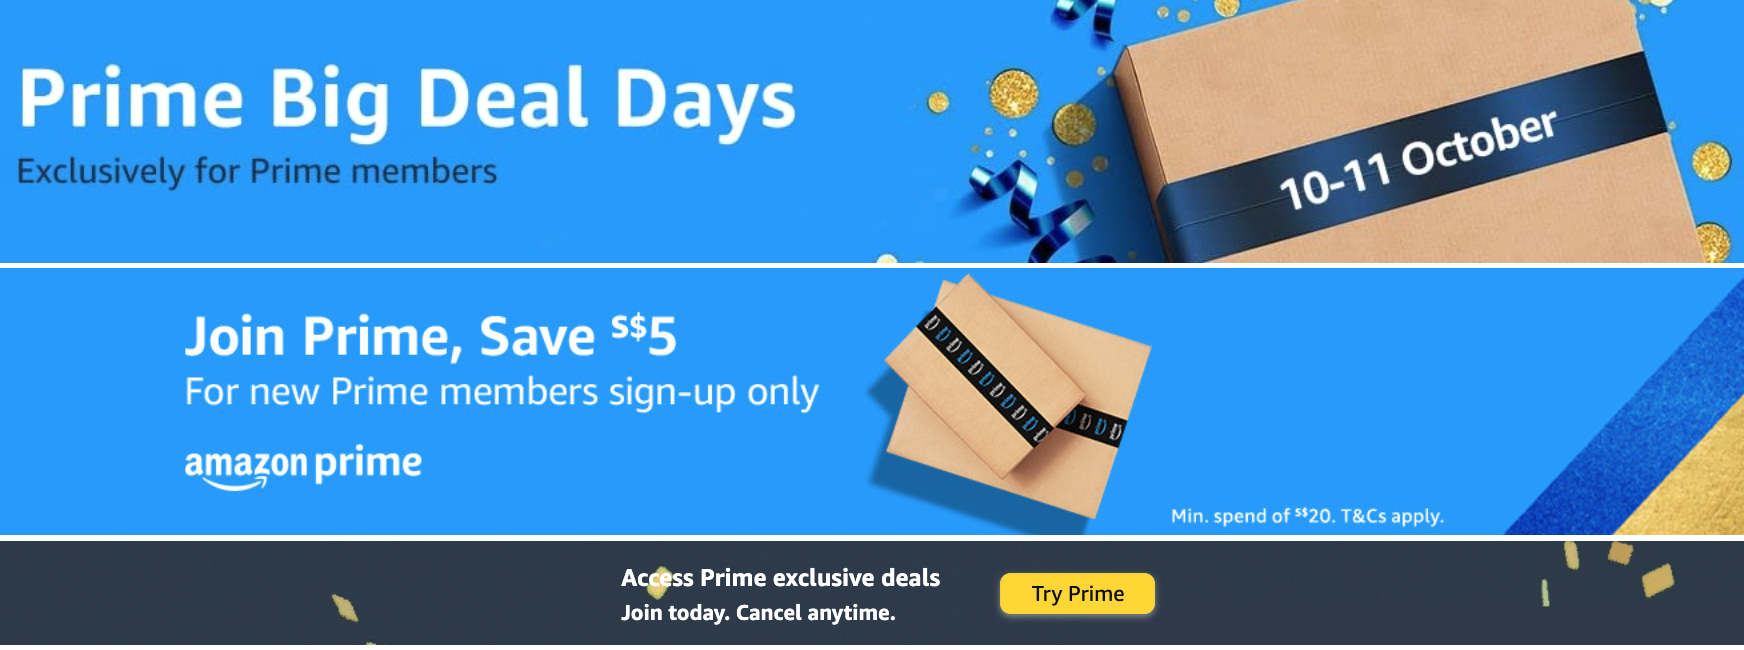 TL;DR - snag these e-deals on first-ever Prime Big Deal Days